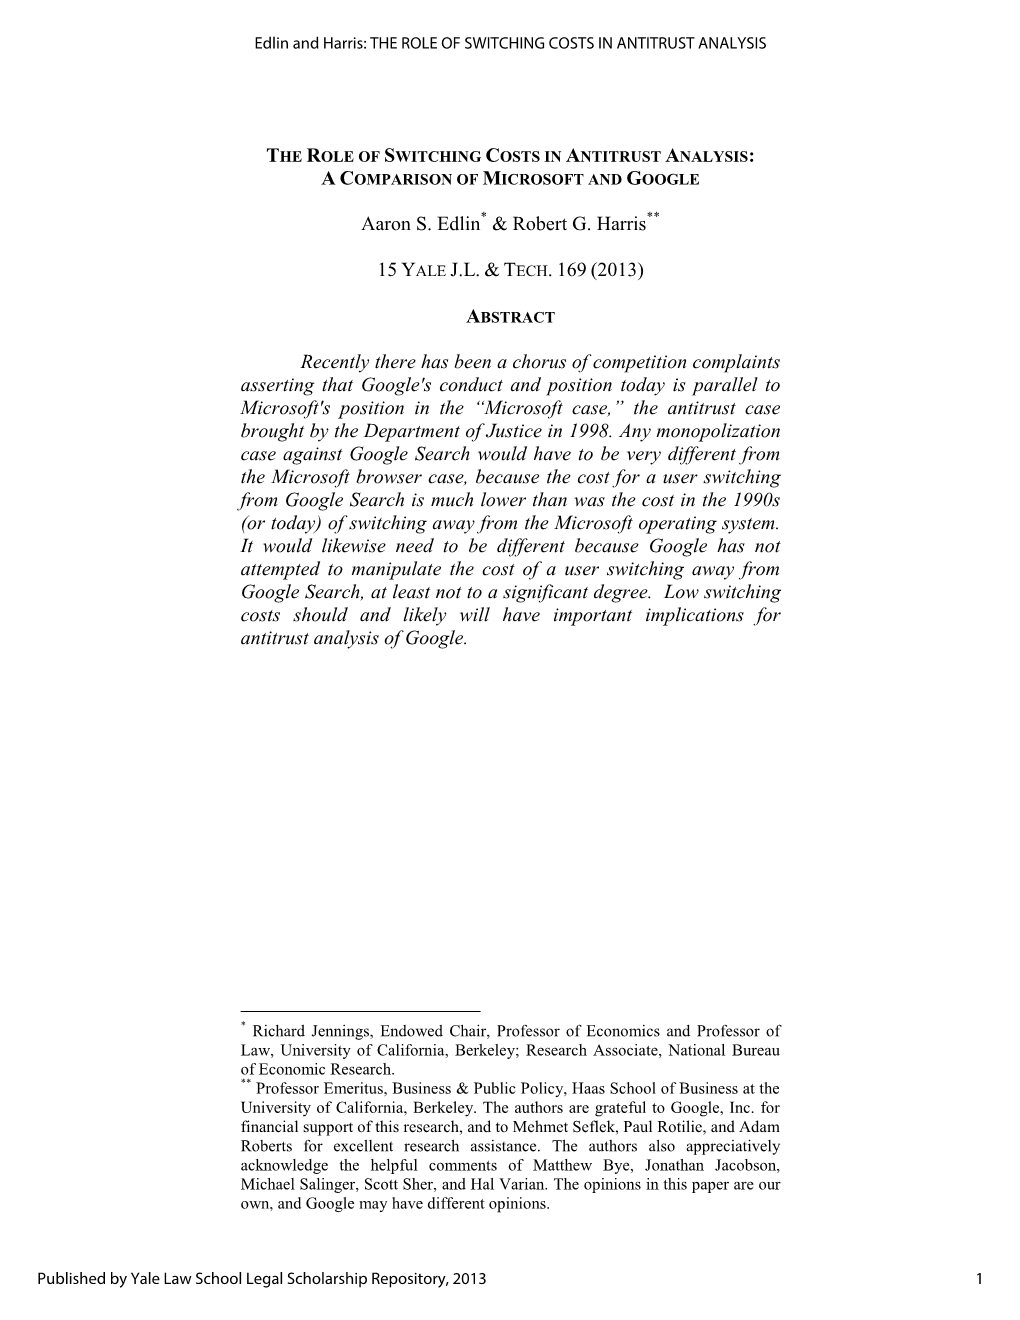 The Role of Switching Costs in Antitrust Analysis